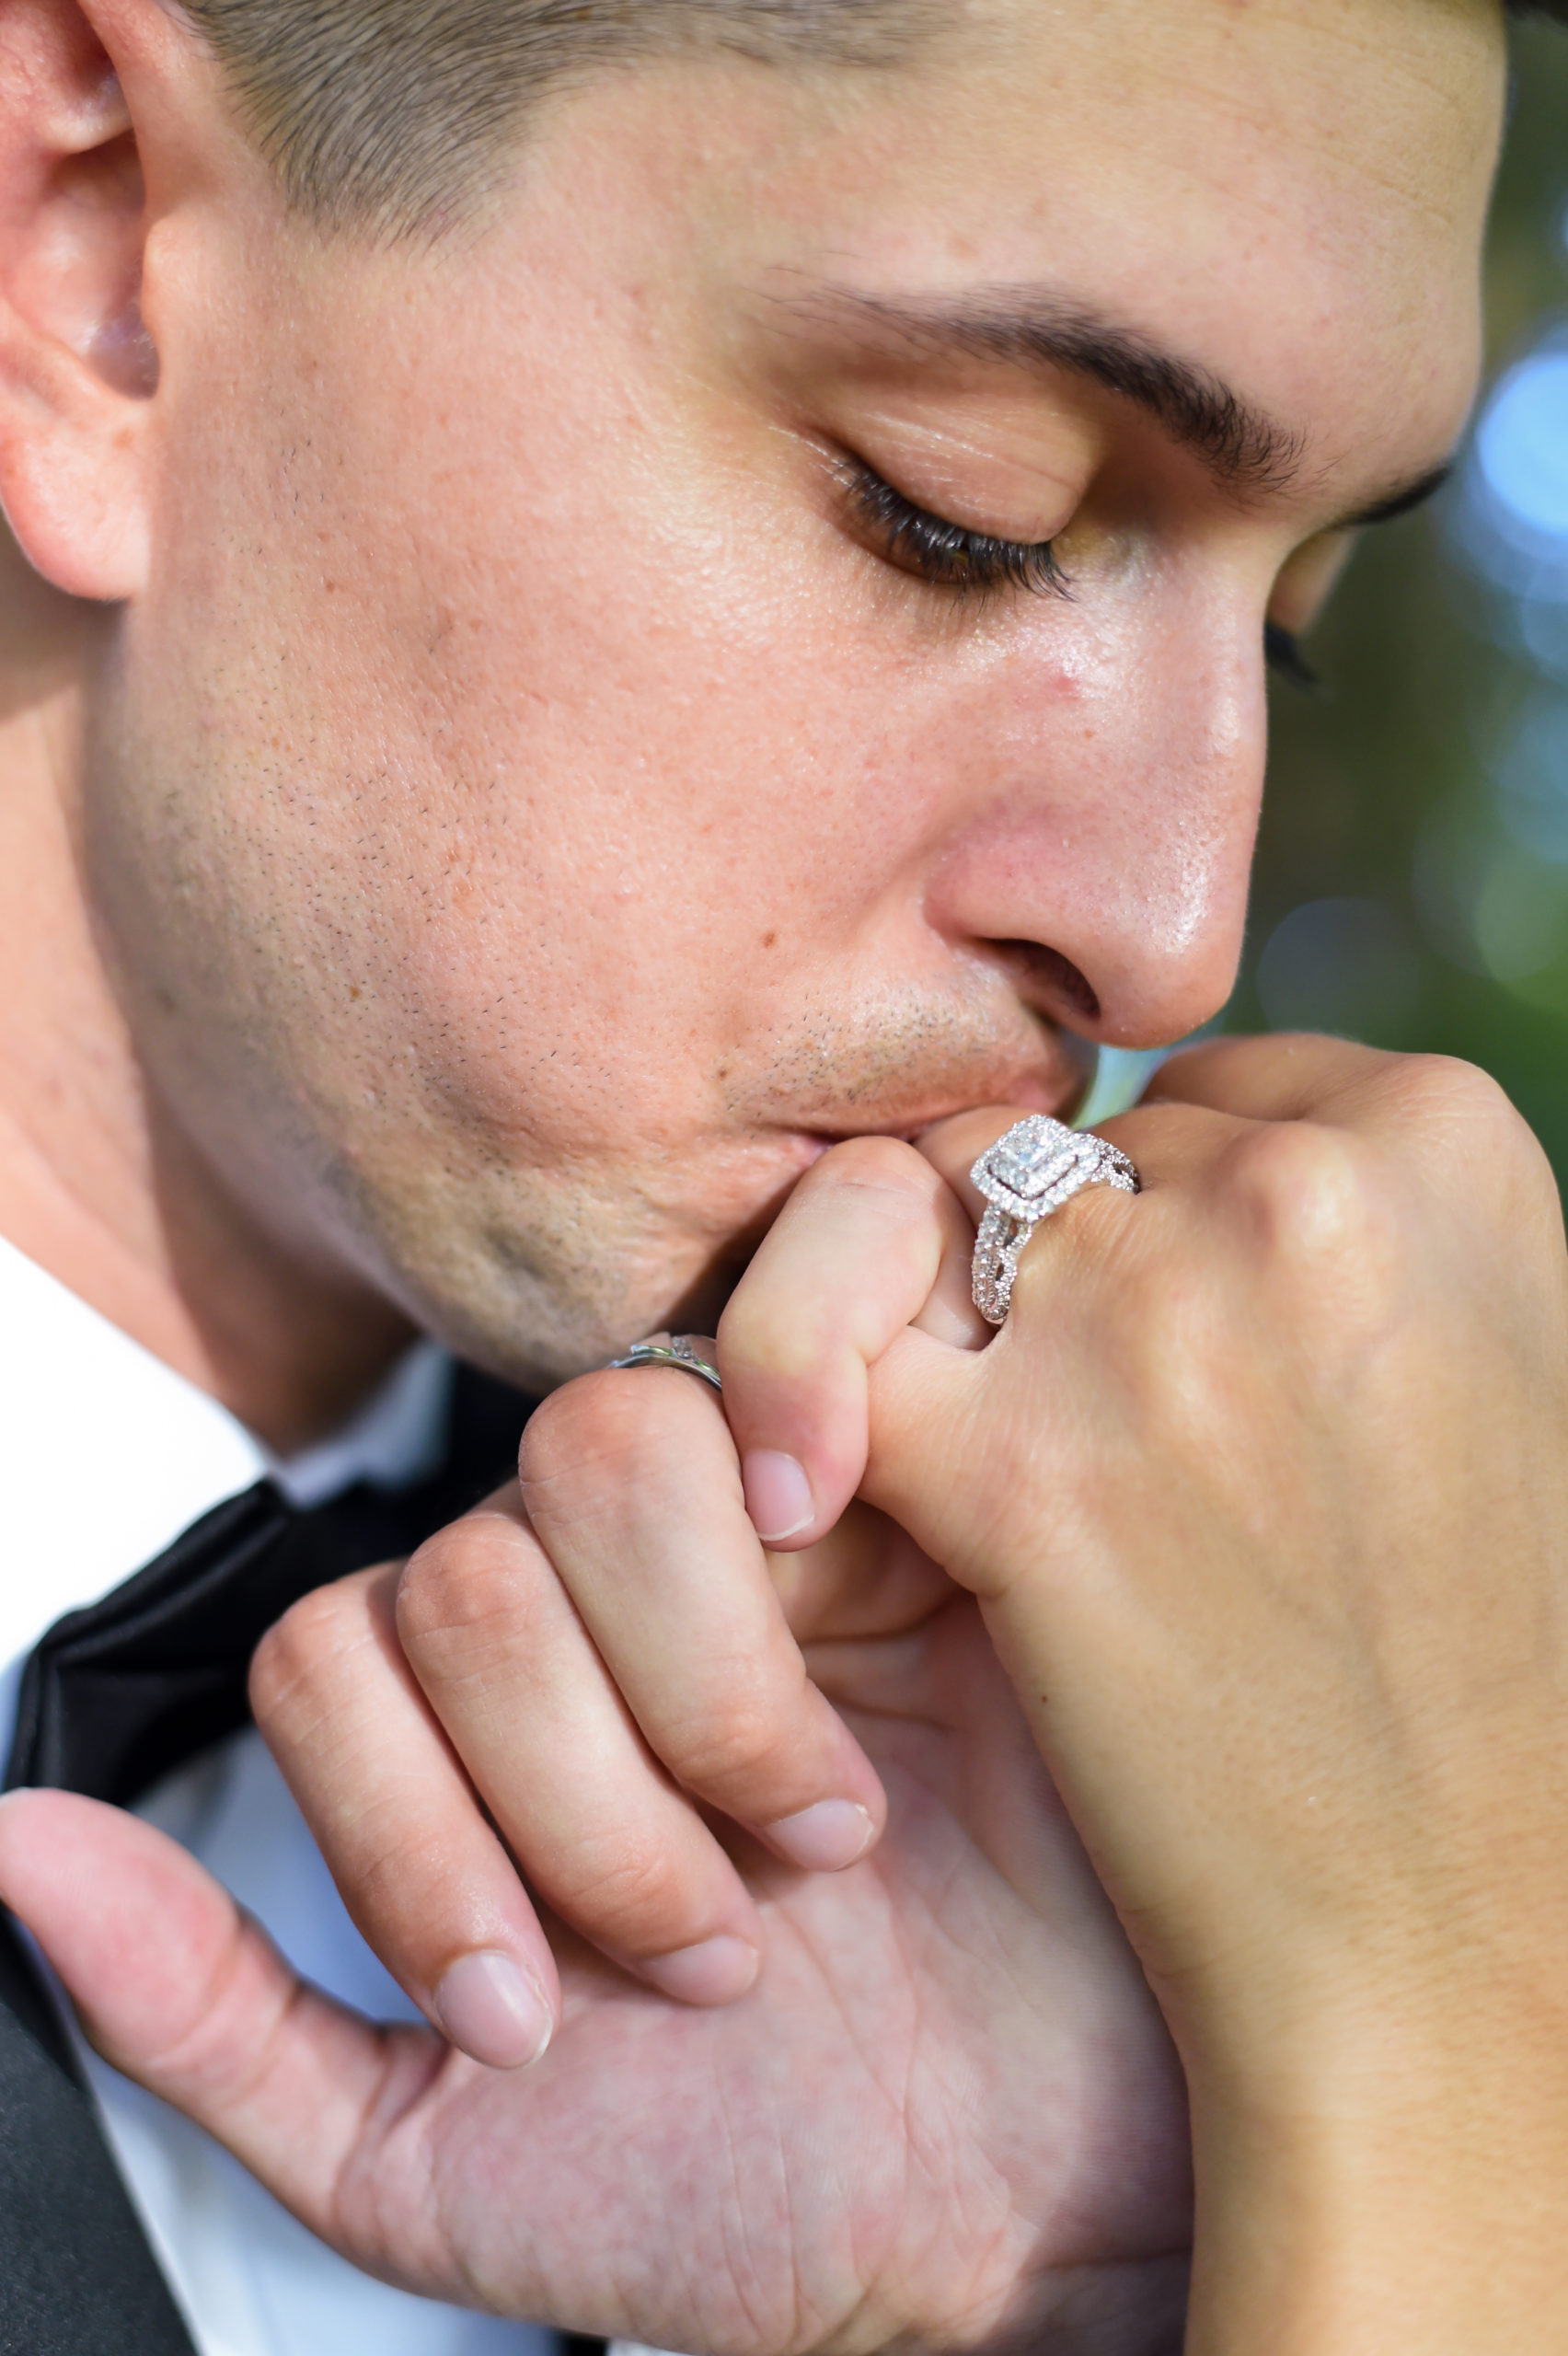 The groom kisses the bride's hand as it now adorns a wedding ring!